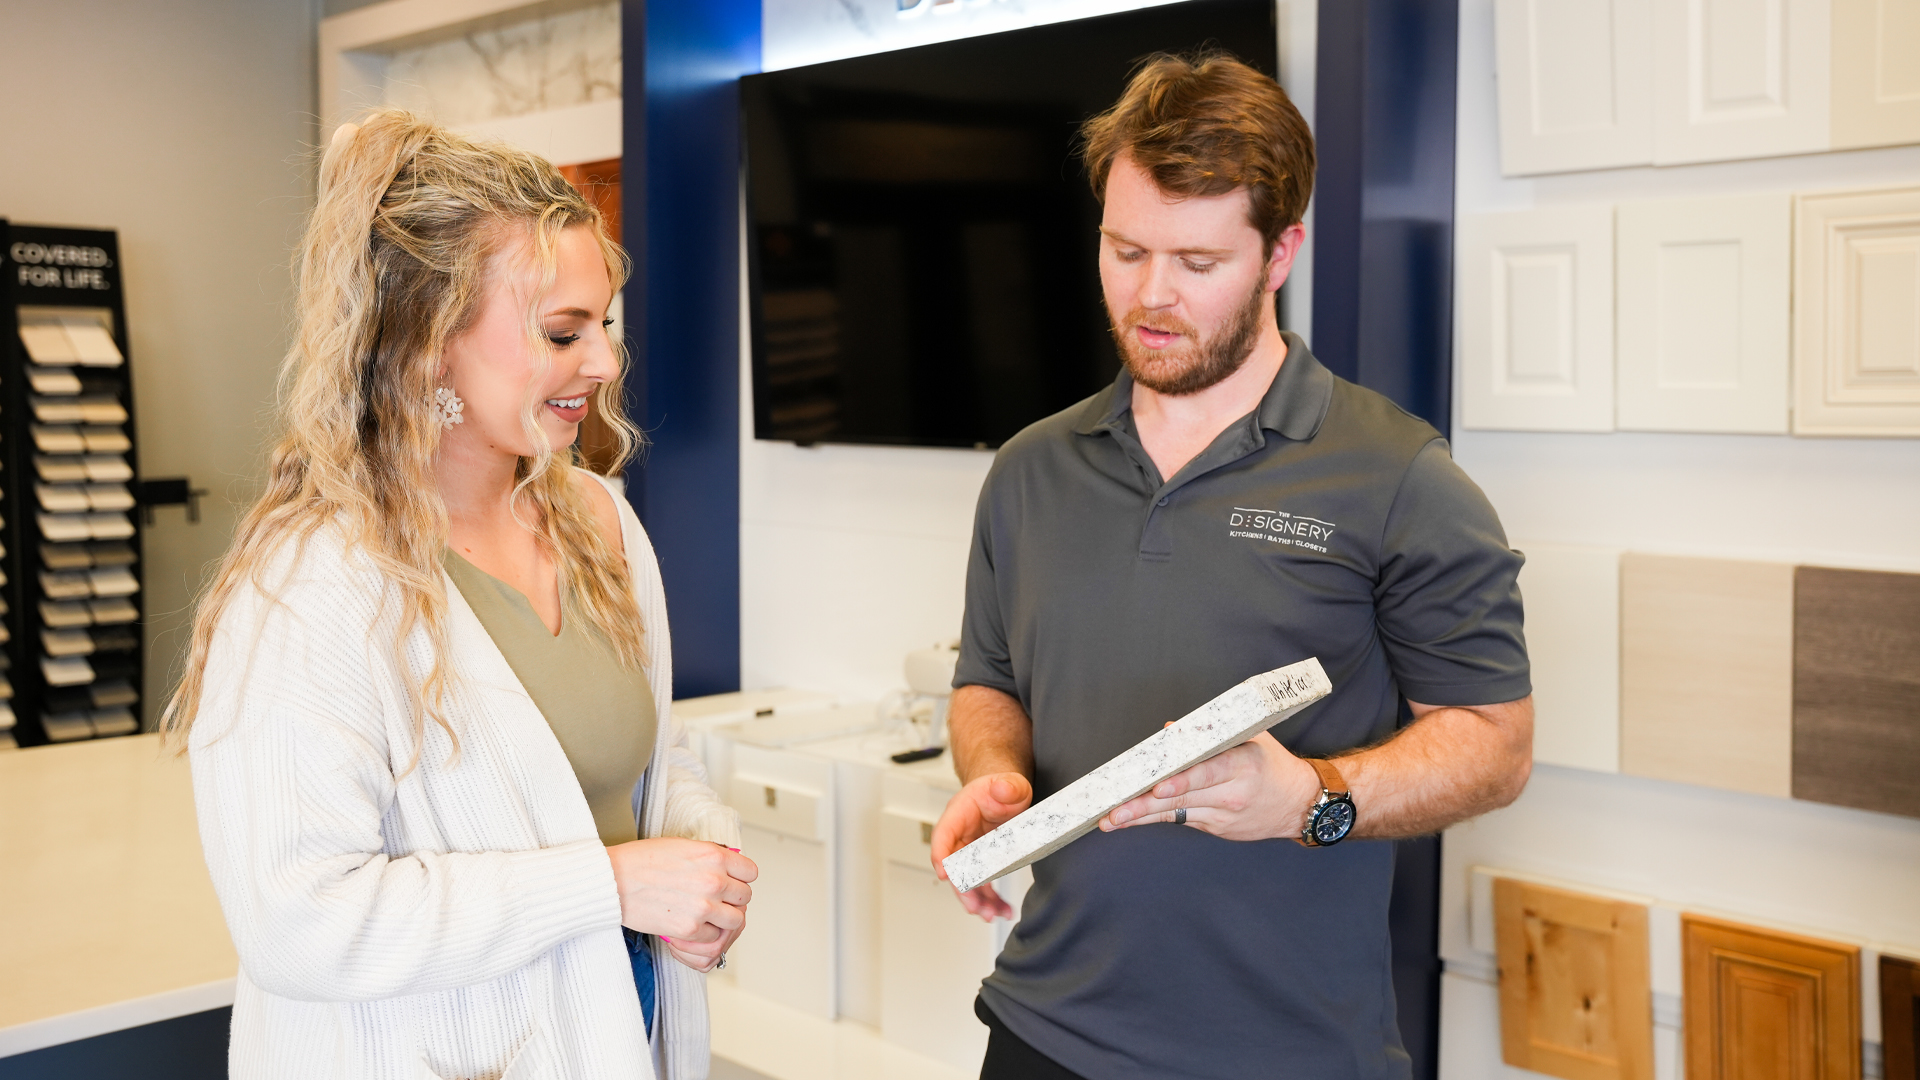 A Designery expert shows a customer a piece of sample countertop in The Designery showroom